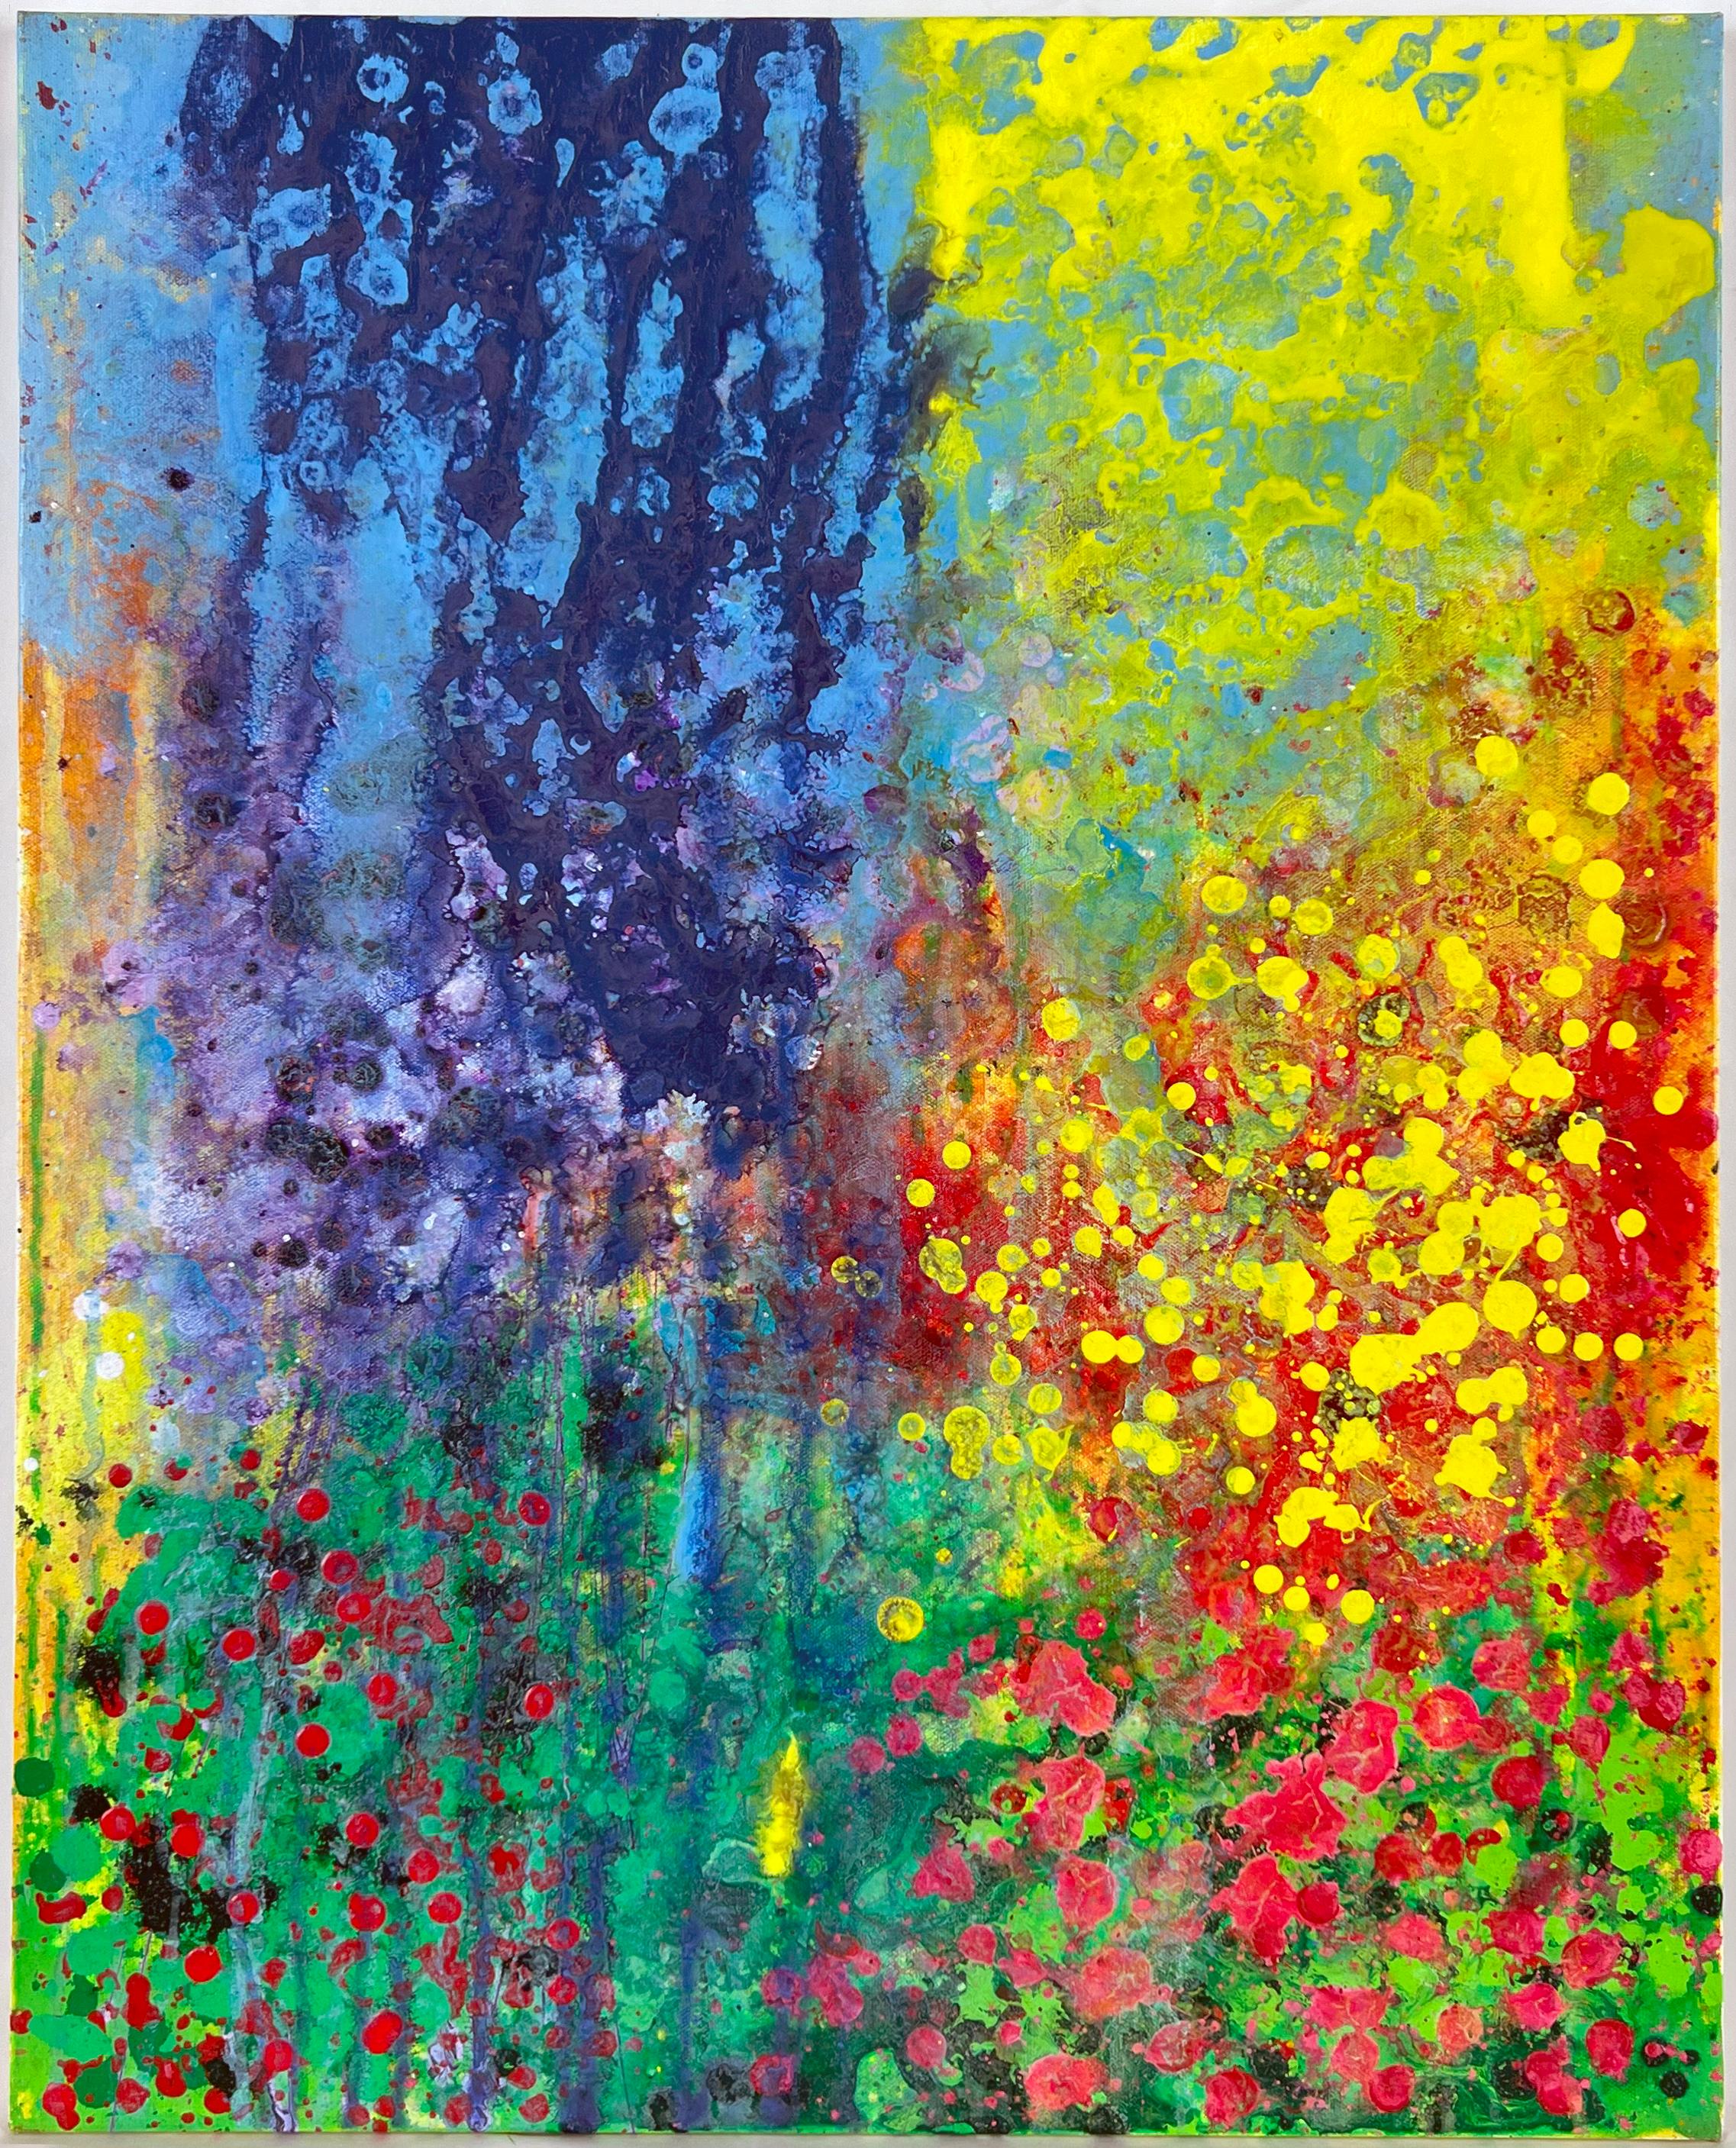 Charles David Francis Landscape Painting - "Garden Series #4" - Abstract Expressionist Composition in Acrylic on Canvas